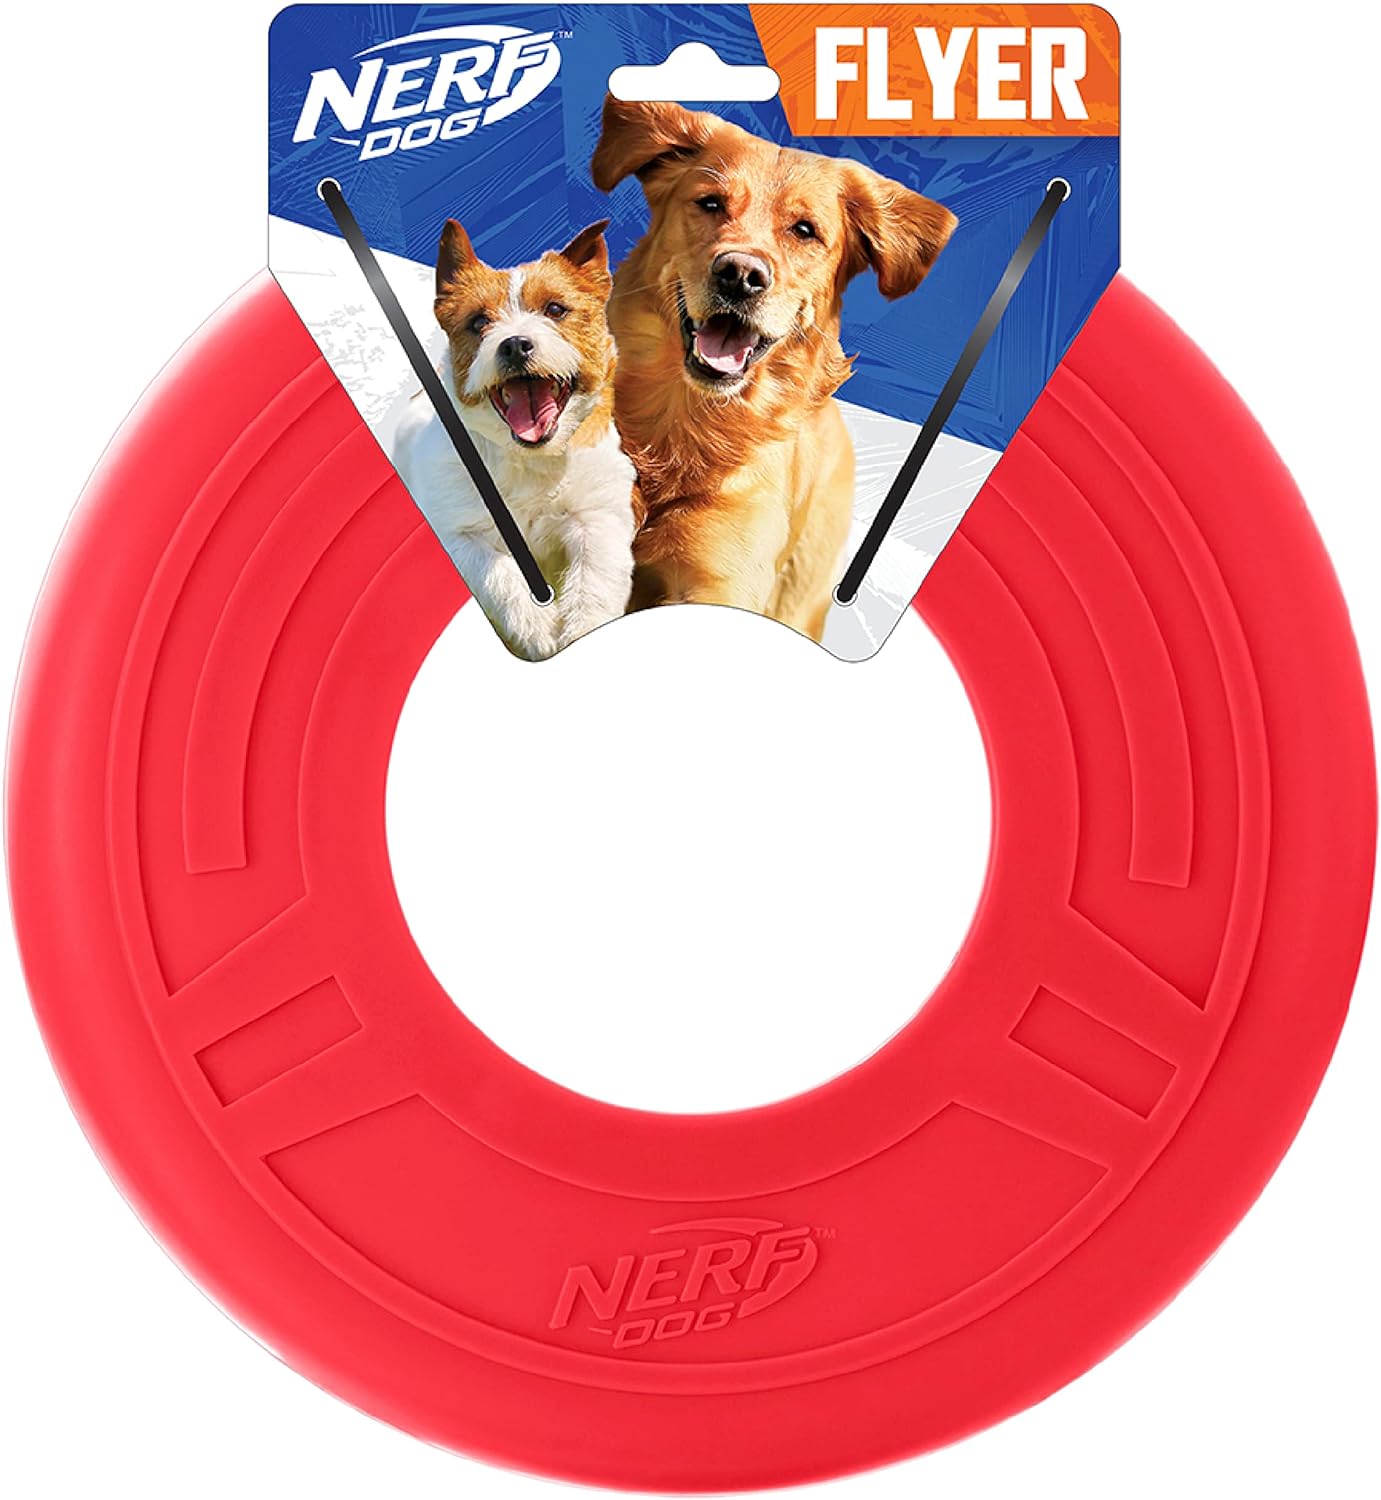 Nerf Dog Atomic Flyer Dog Toy, Flying Disc, Lightweight, Durable and Water Resistant, Great for Beach and Pool, 10 inch Diameter, for Medium/Large Breeds, Single Unit, Red